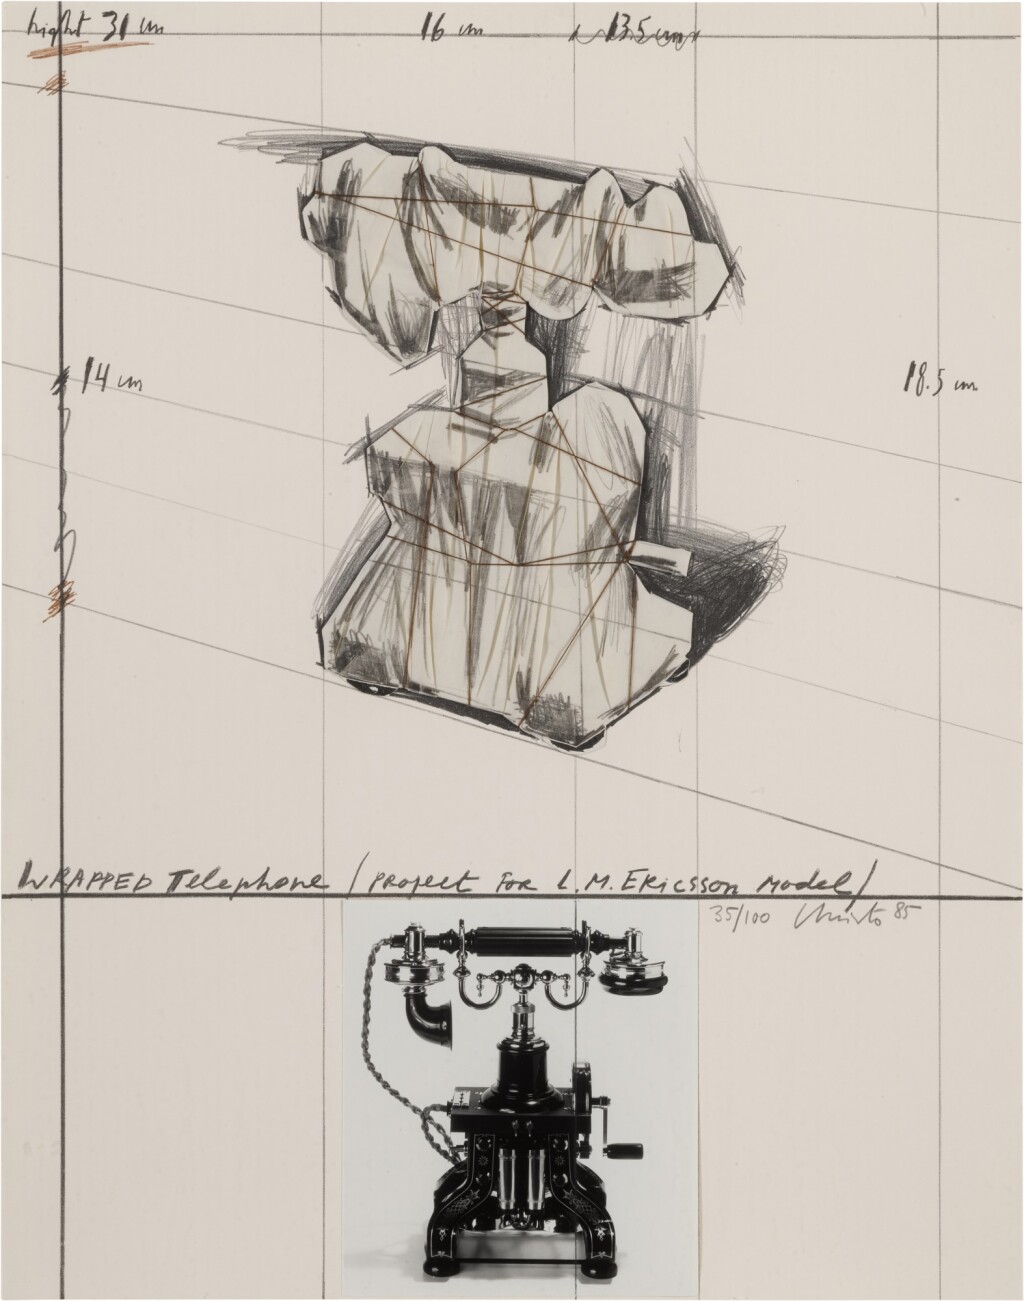 Wrapped Telephone, Project for L.M. Ericsson Model (Schellmann 119)